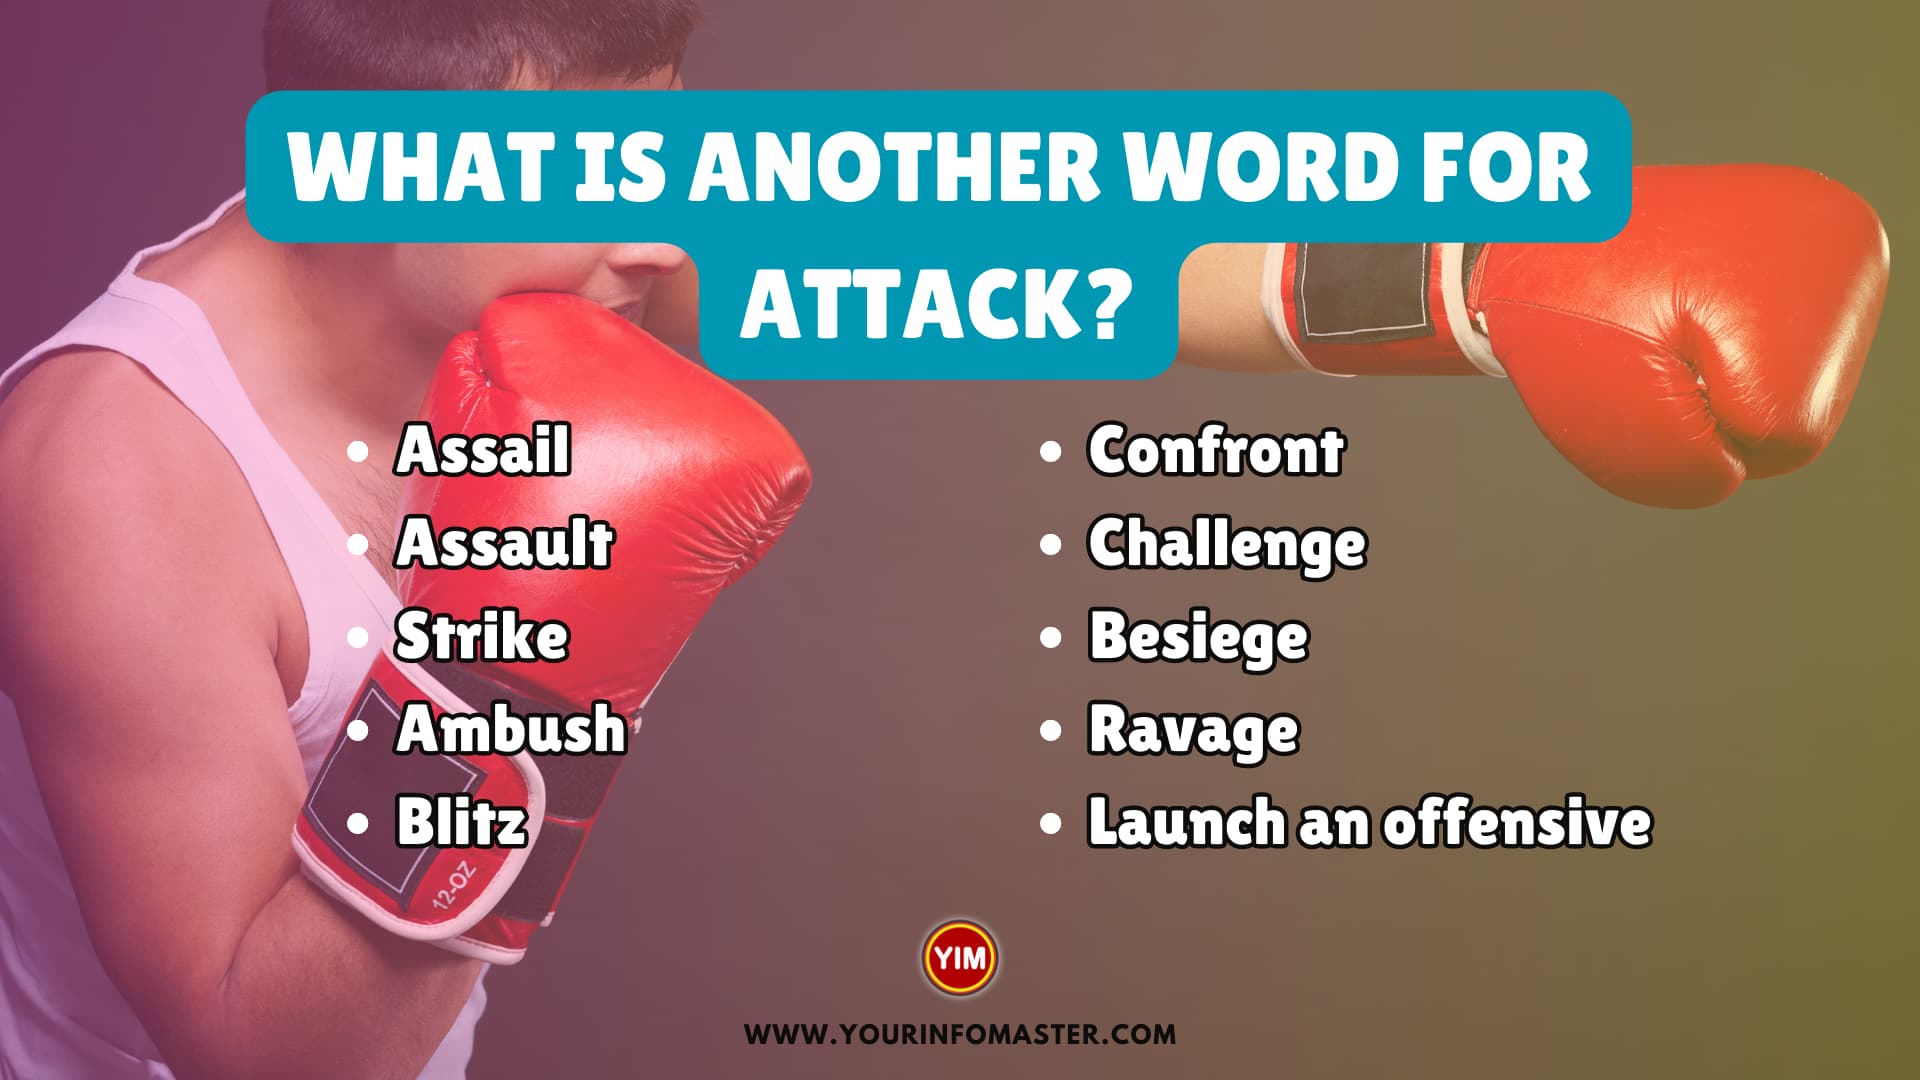 What is another word for Attack